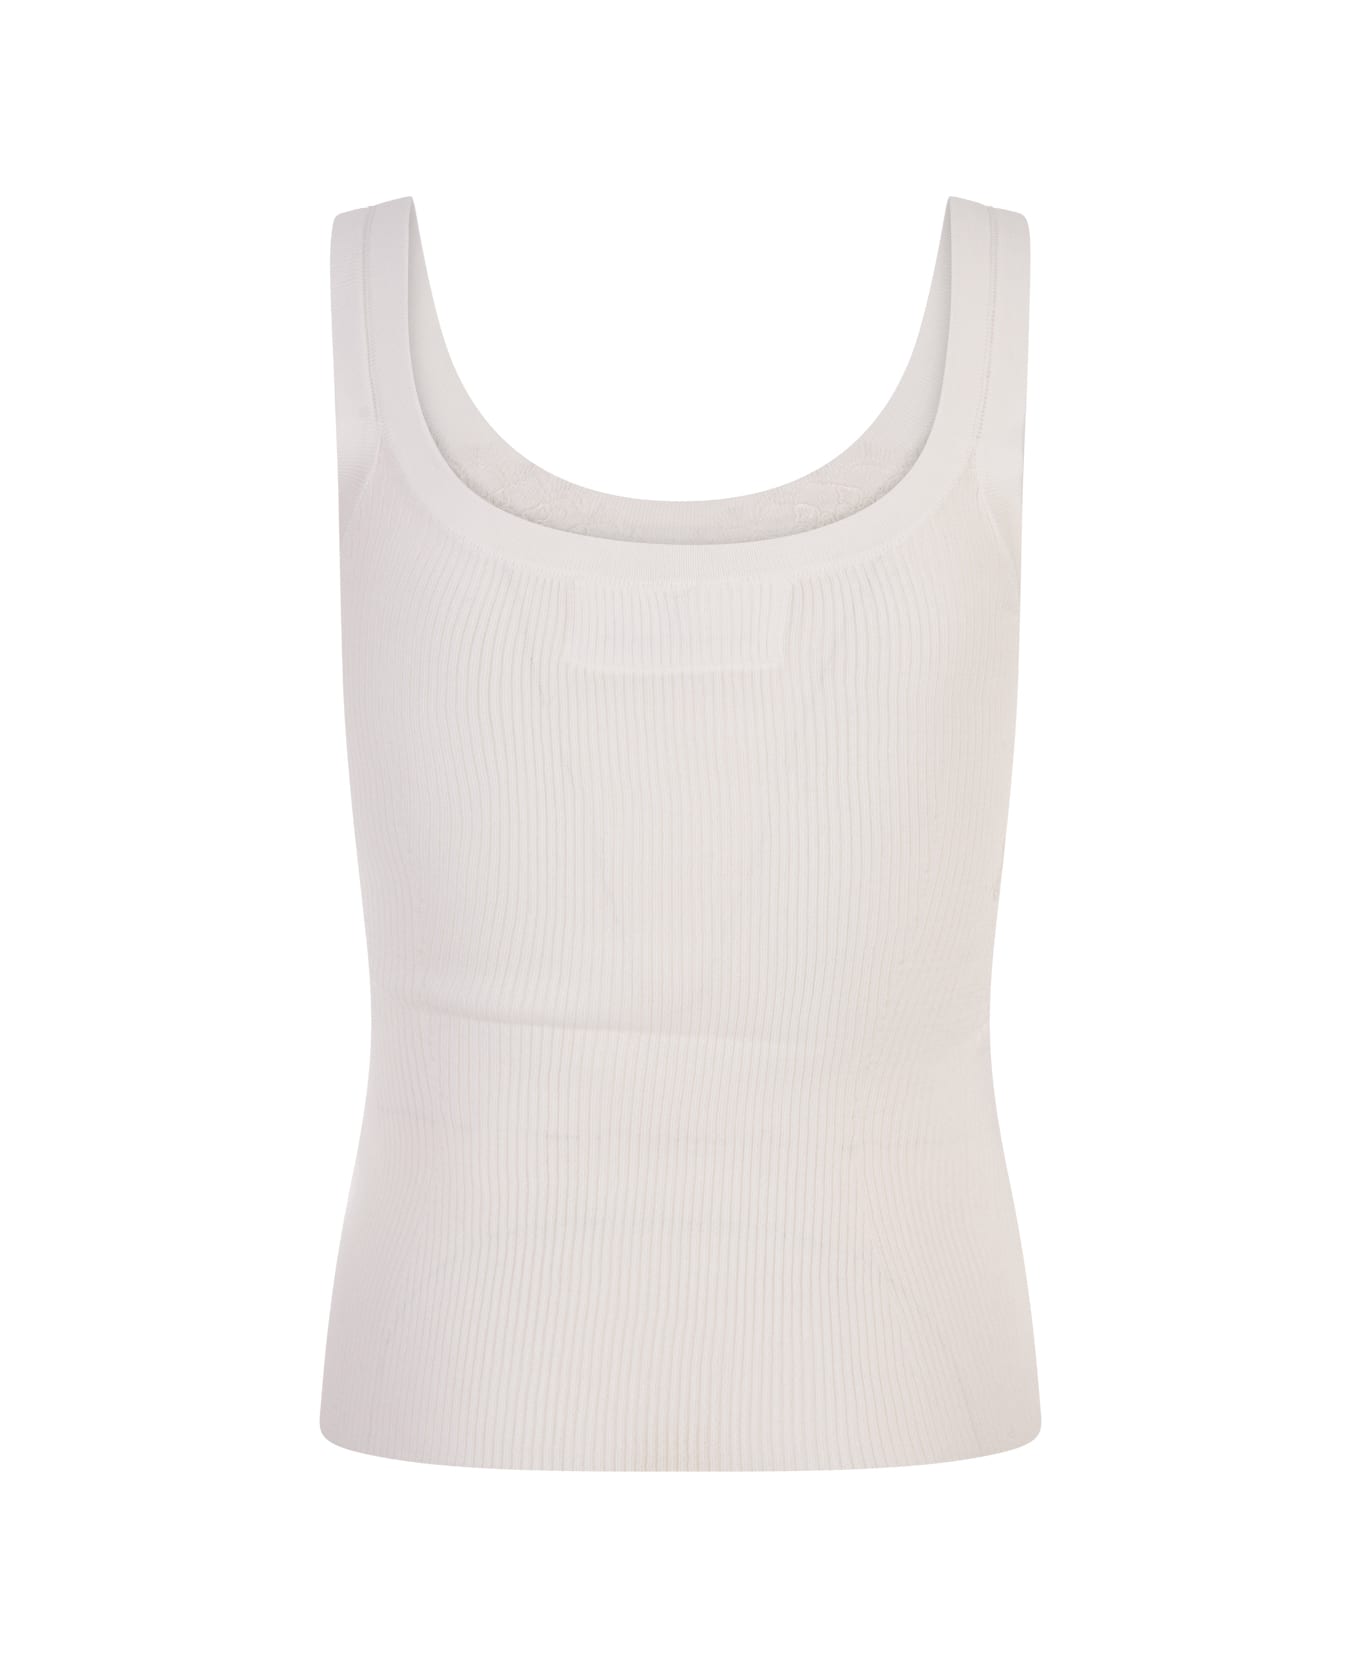 Ermanno Scervino White Ribbed Tank Top With Lace - Bianco タンクトップ